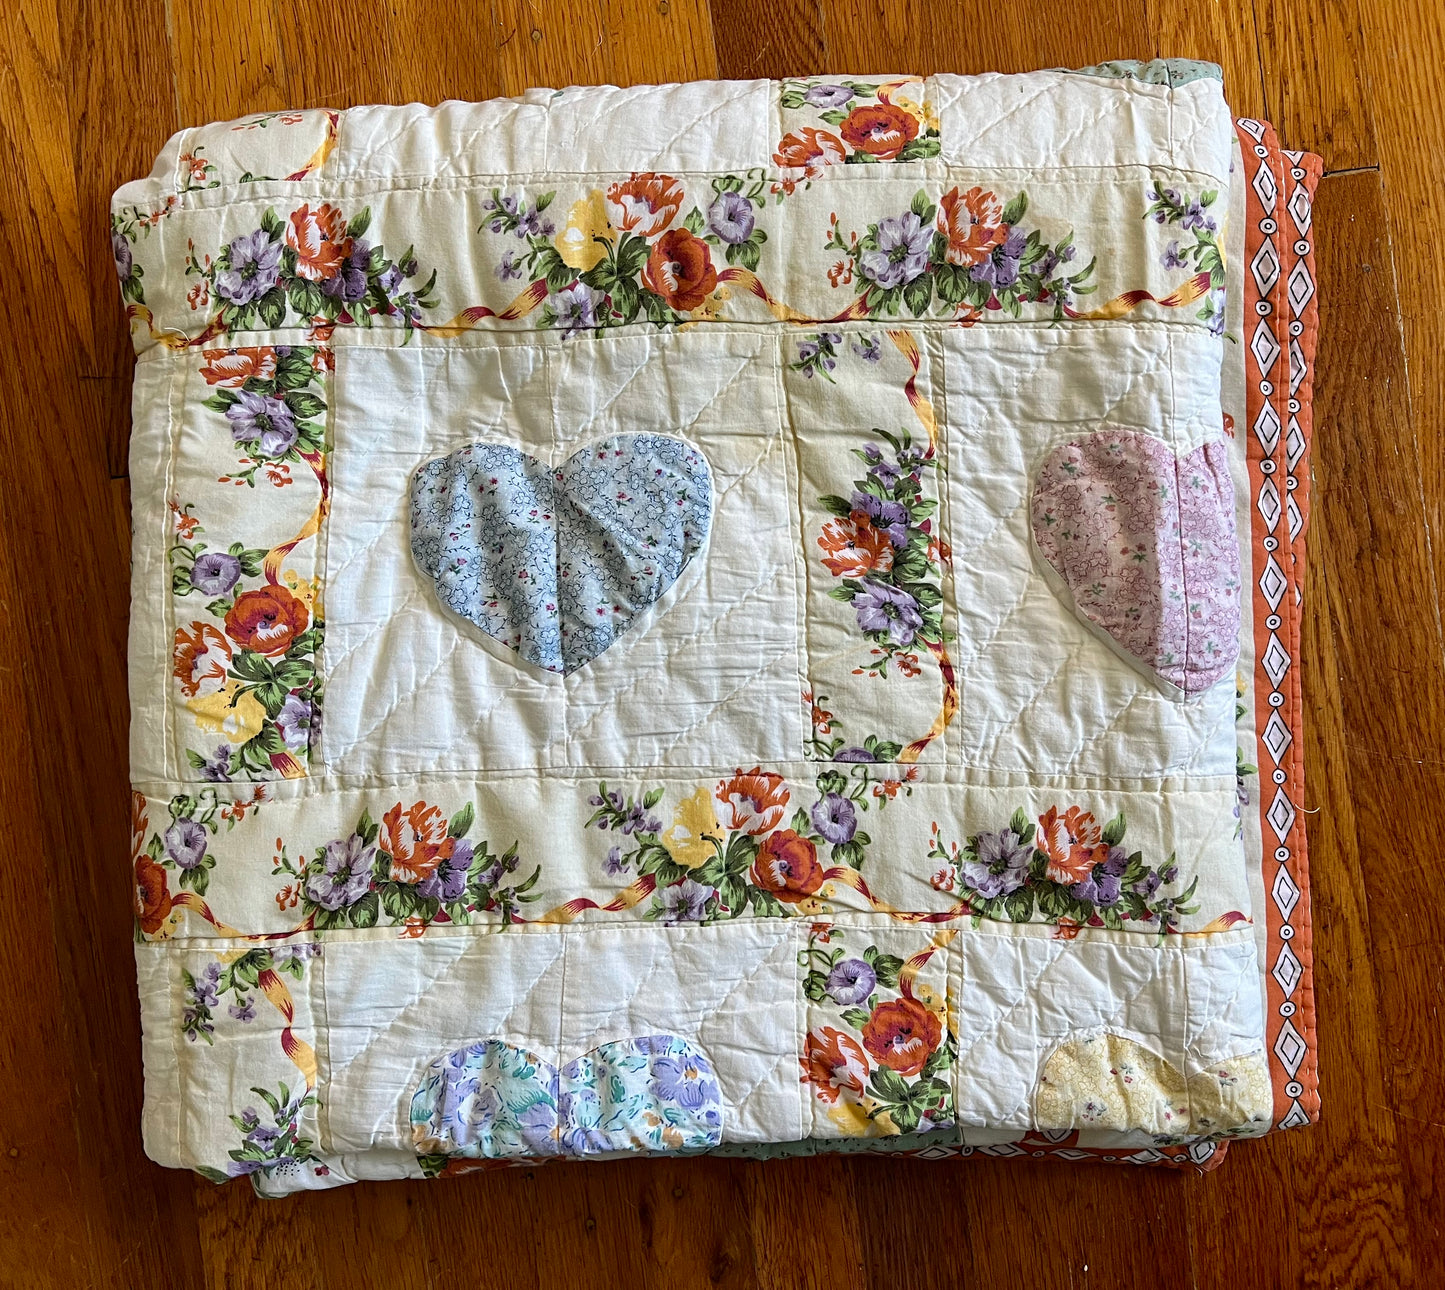 the quilt is folded neatly, and lays on top of a wood floor